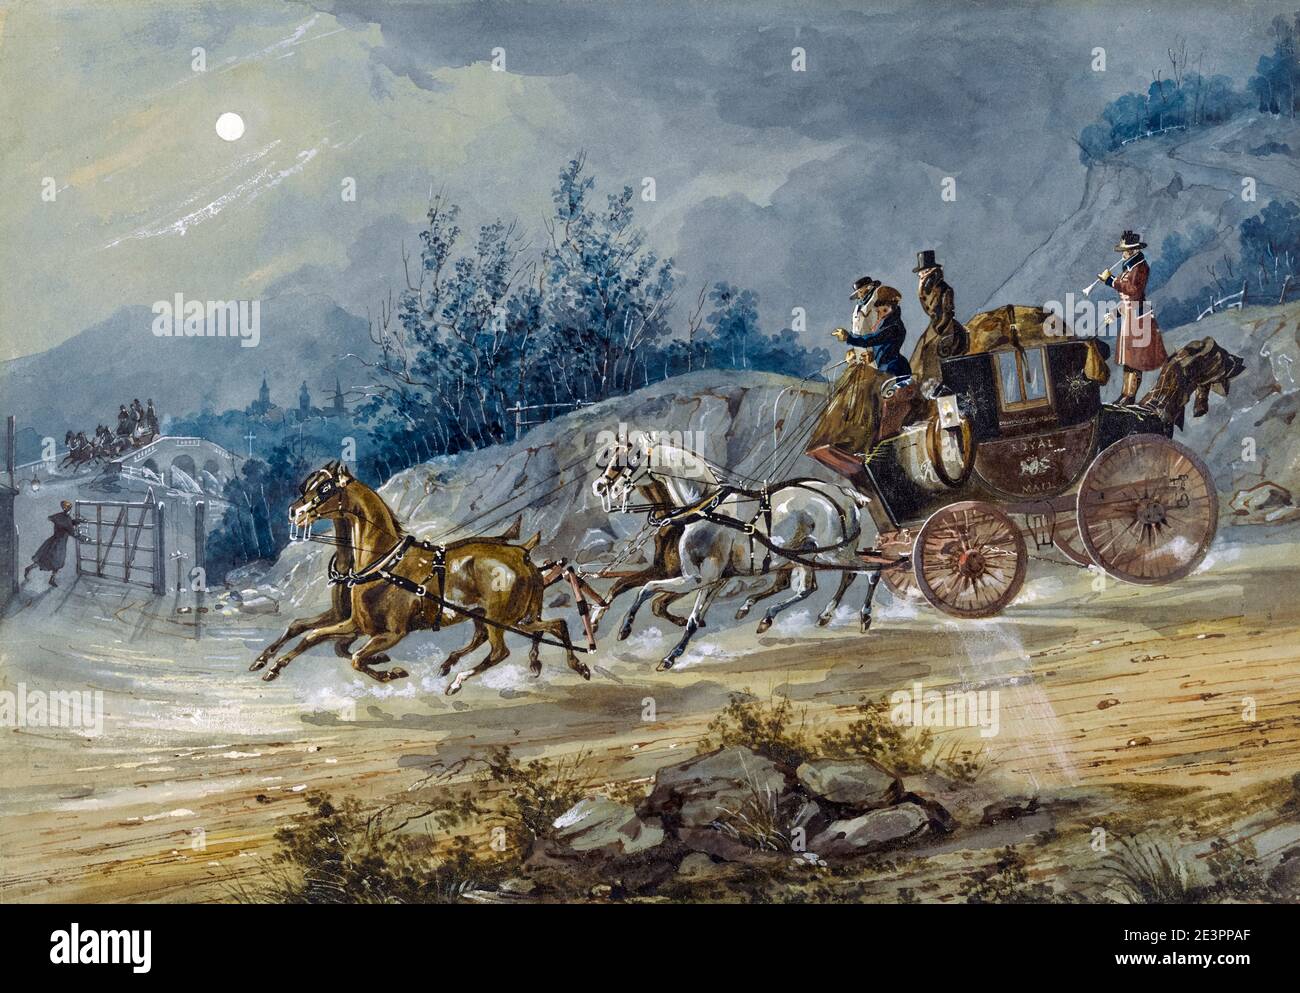 The London-Dumphries (sic) Royal Mail Coach and Horses, Gemälde von Charles B. Newhouse, 1830-1840 Stockfoto